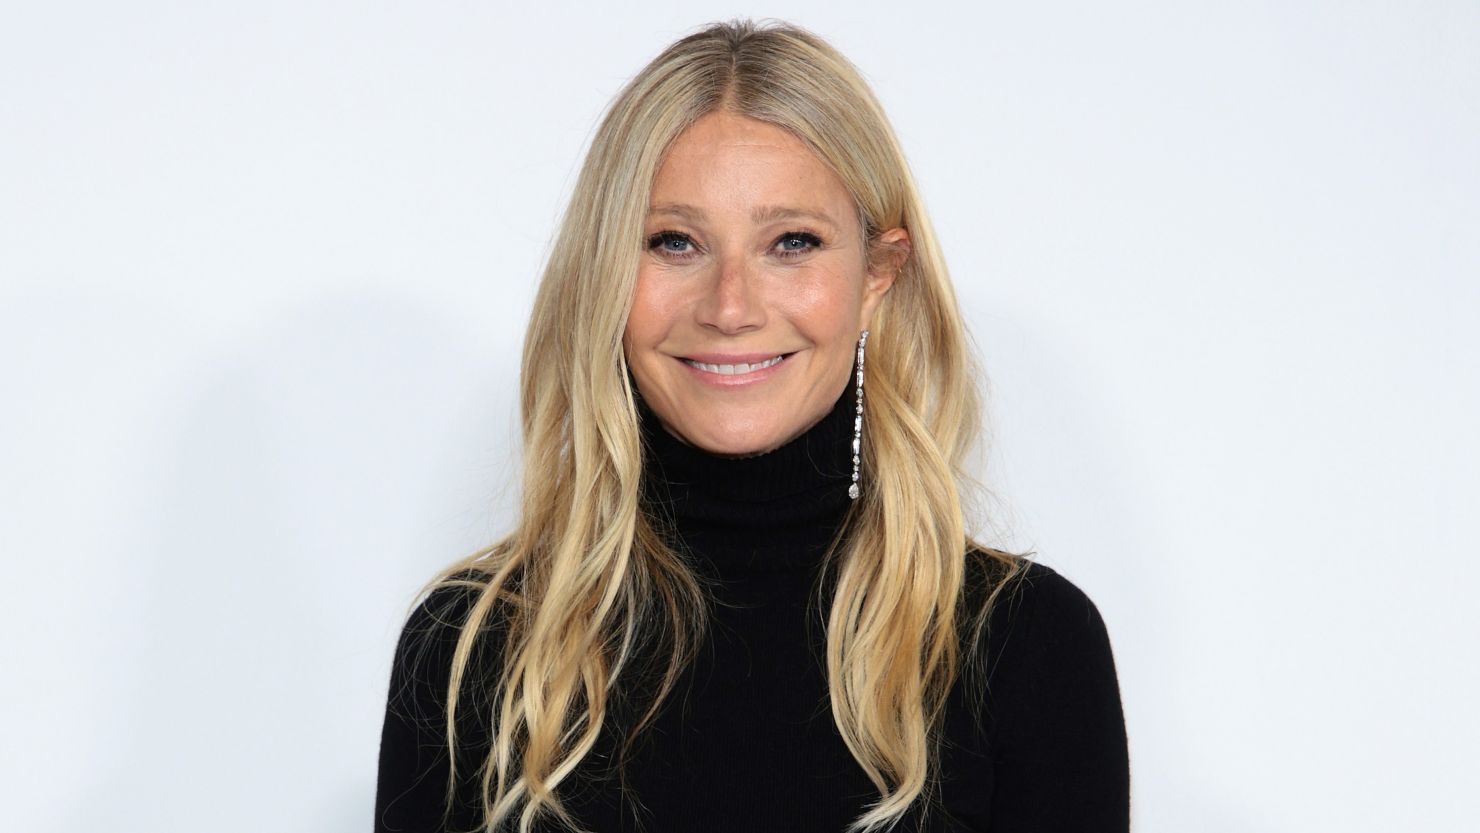 NEW YORK, NEW YORK - NOVEMBER 06: Gwyneth Paltrow attends the 2023 CFDA Fashion Awards at American Museum of Natural History on November 06, 2023 in New York City. (Photo by Dimitrios Kambouris/Getty Images)